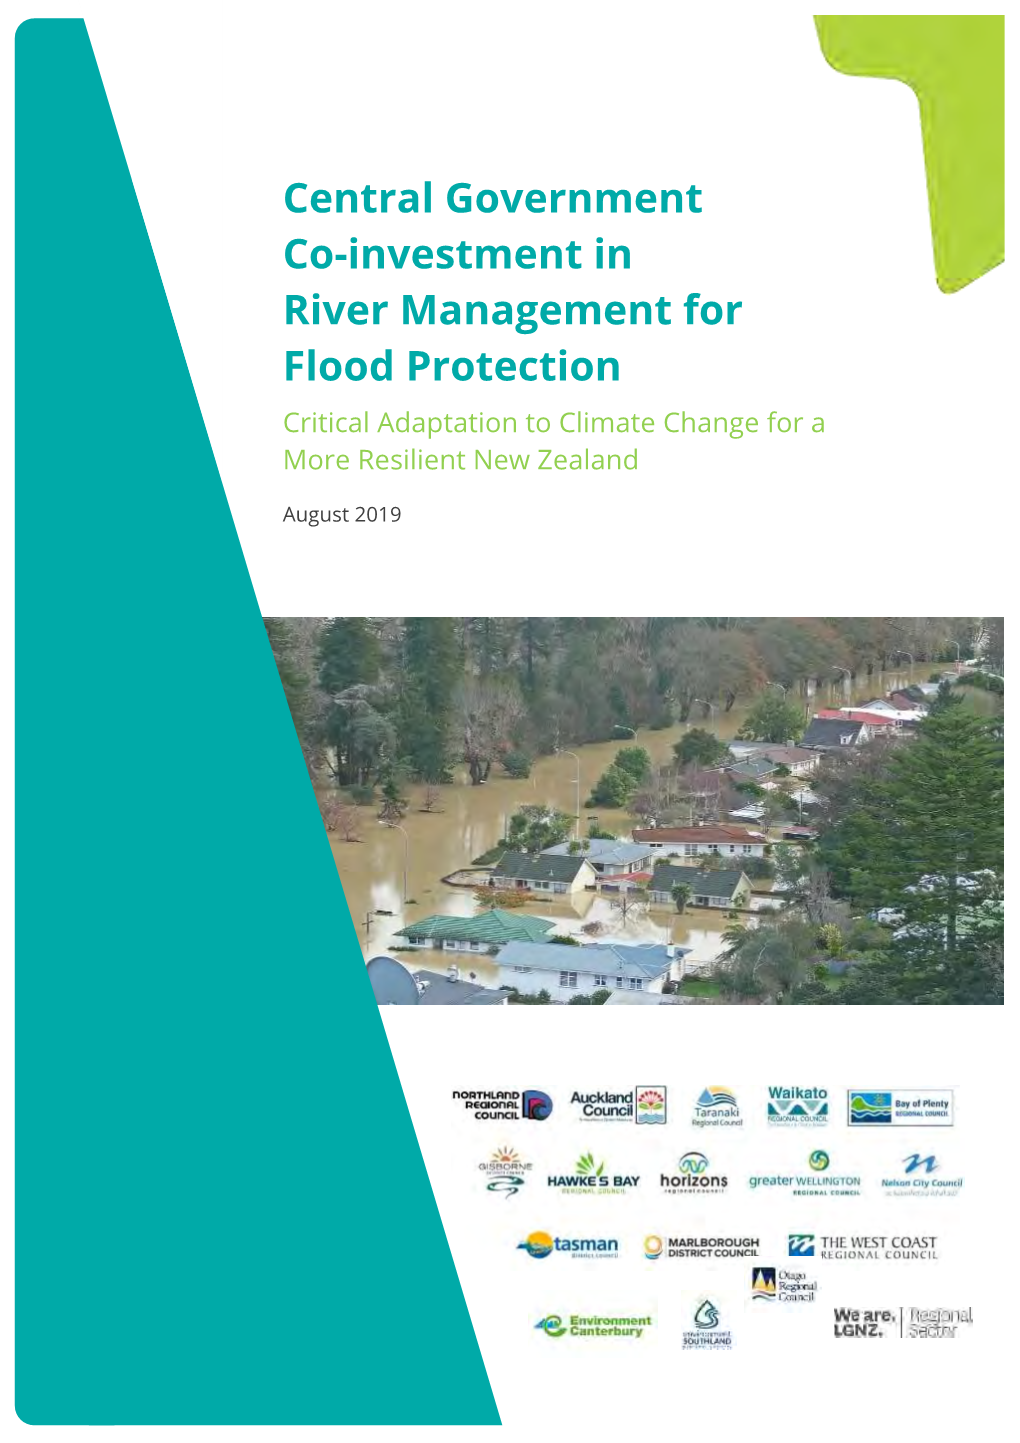 Central Government Co-Investment in River Management for Flood Protection Critical Adaptation to Climate Change for a More Resilient New Zealand